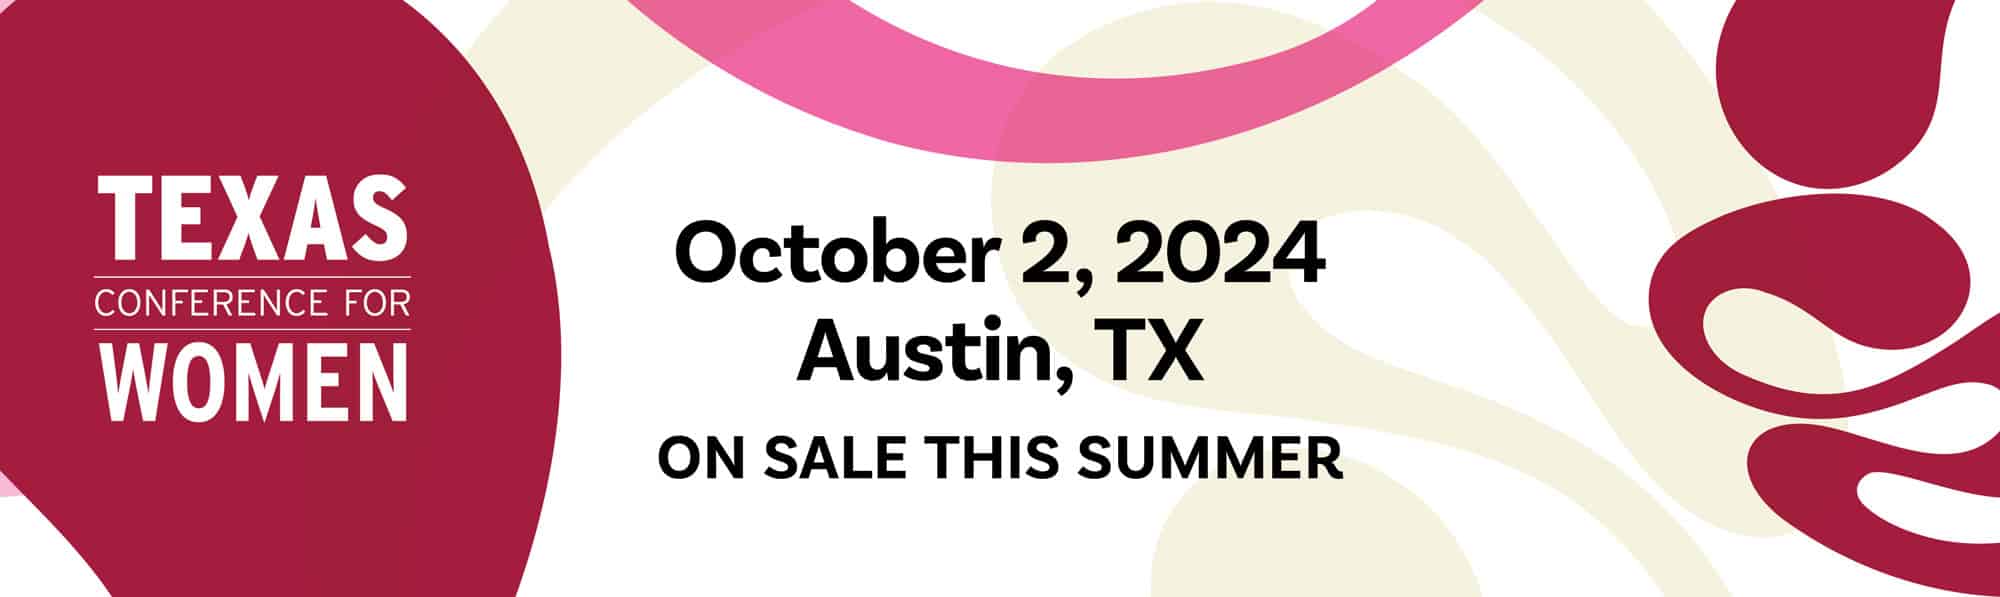 TX Conference for Women: October 2, 2024. Austin, TX. On sale this summer.